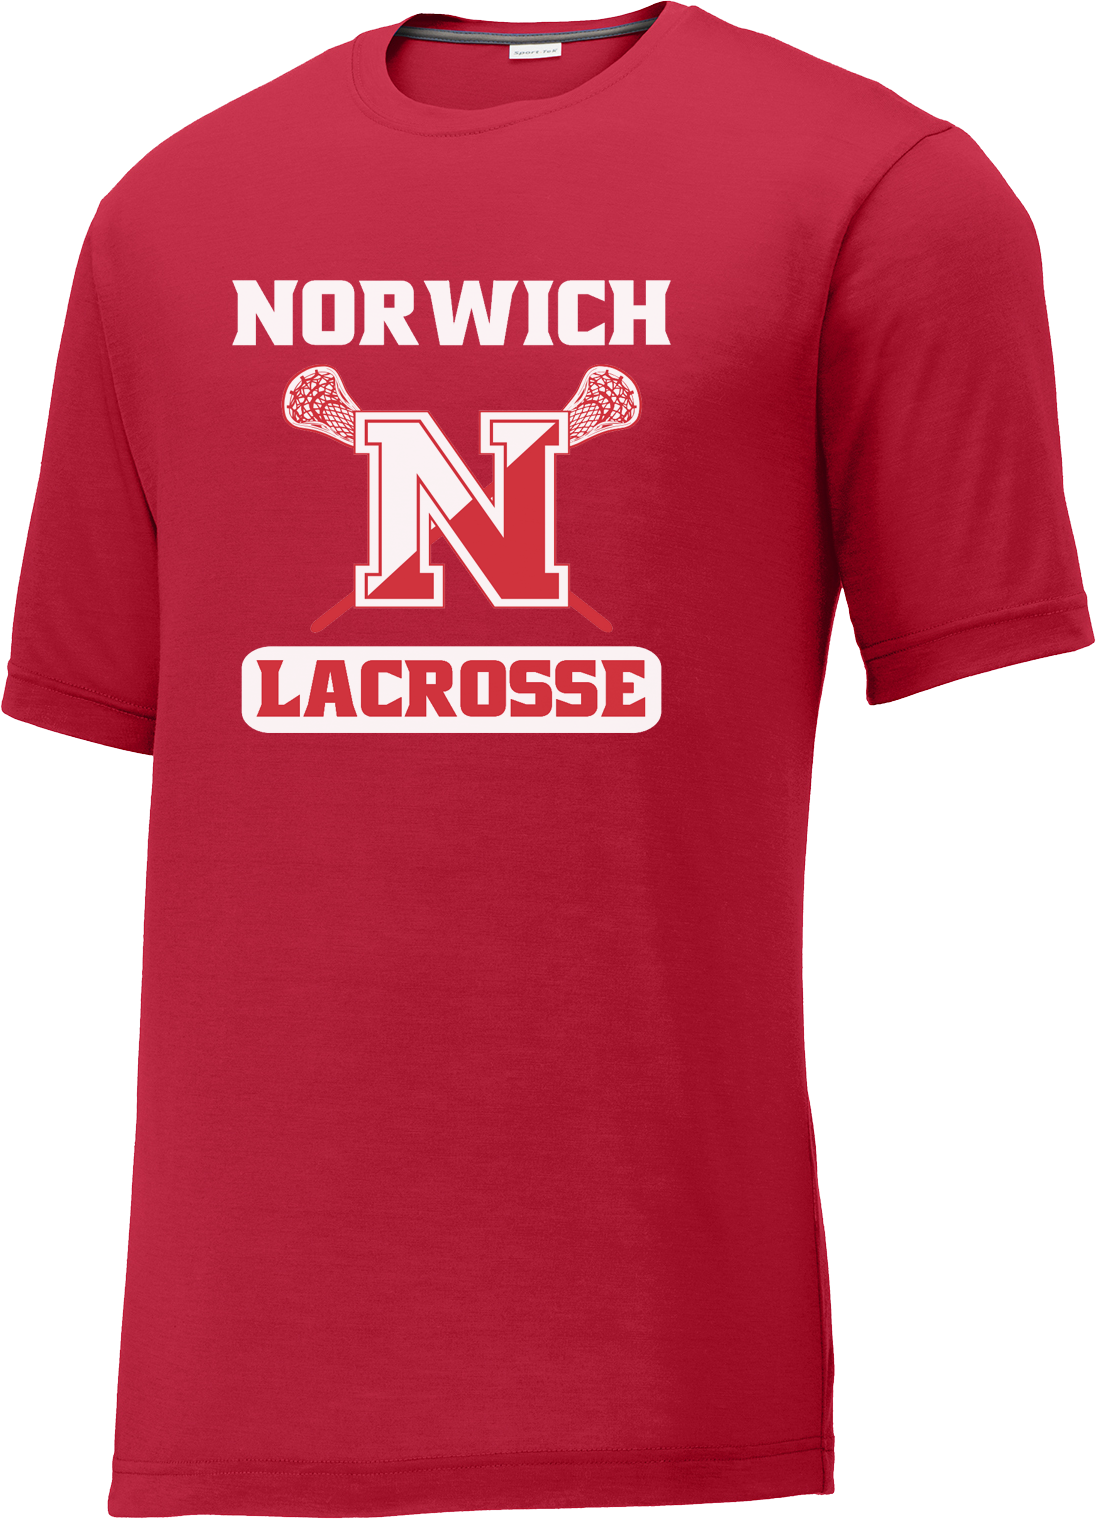 Norwich Youth Lacrosse Red CottonTouch Performance T-Shirt